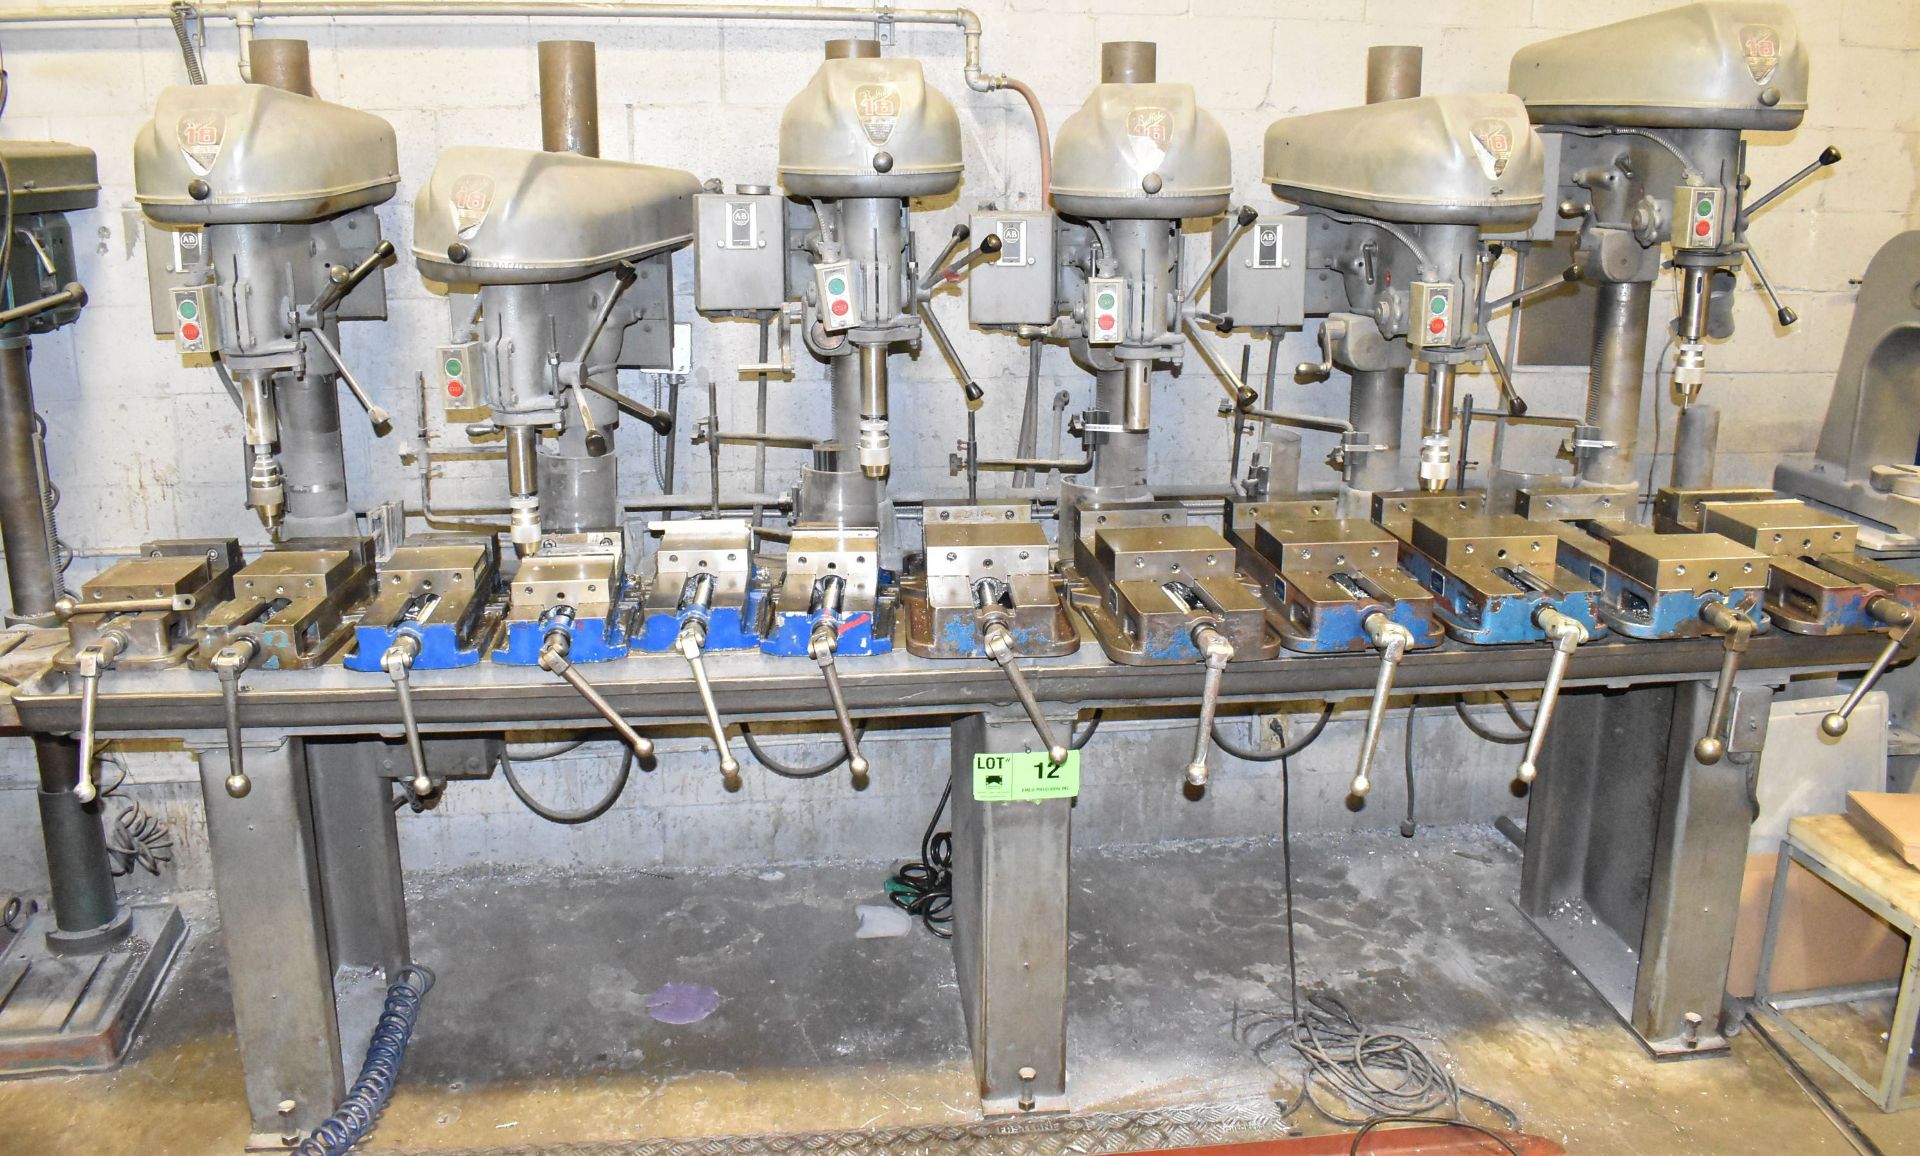 DRILLING STATION WITH (6) BUFFALO 18 DRILL PRESSES WITH SPEEDS TO 3,600 RPM, S/N N/A (MACHINE